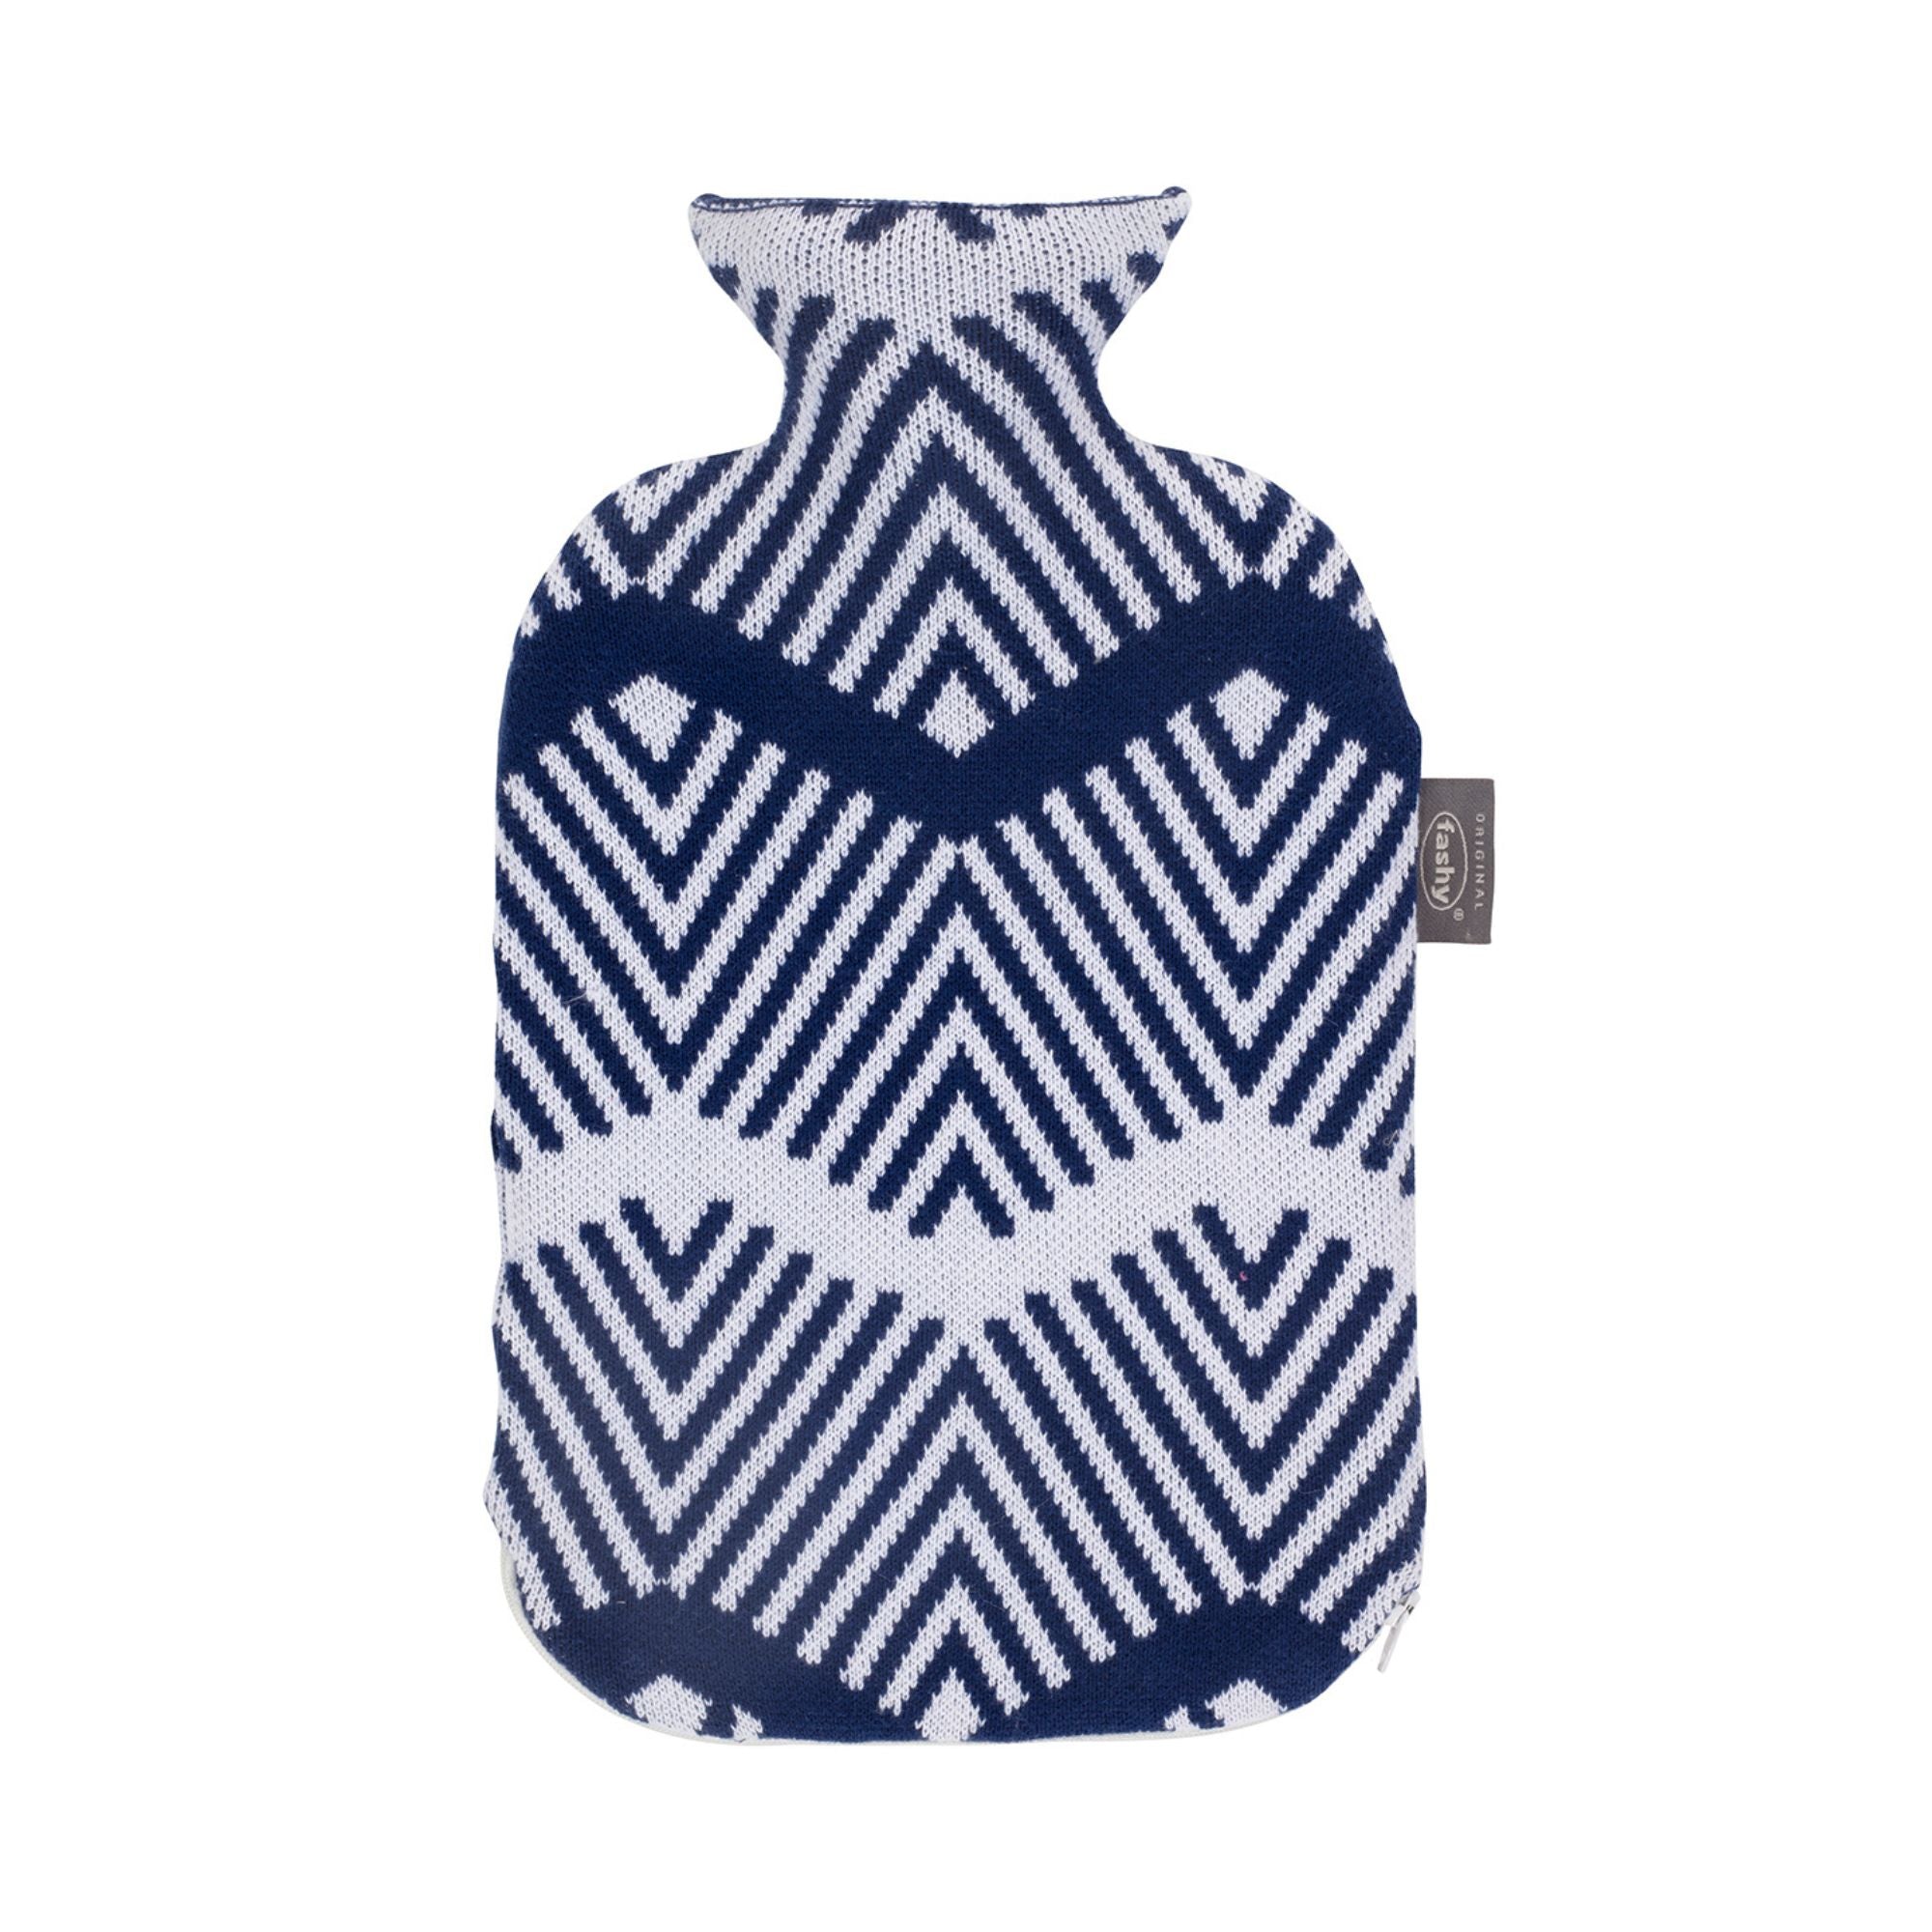 2 Litre Fashy Hot Water Bottle with Blue and White Chevron Knitted Cotton Cover